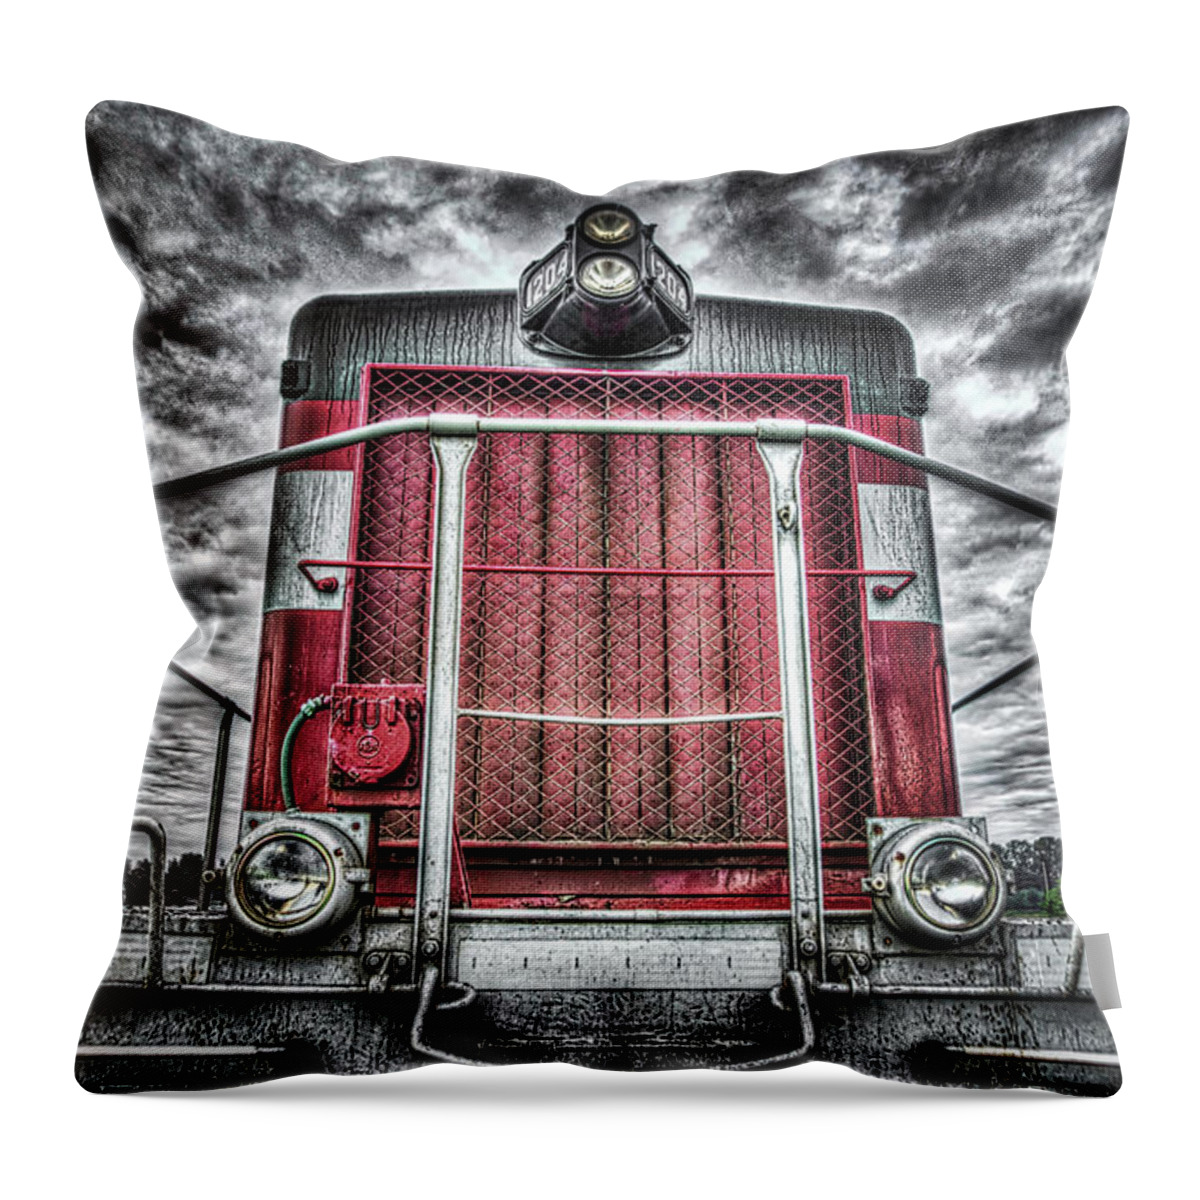 Train Throw Pillow featuring the photograph Classic Locomotive by Spencer McDonald